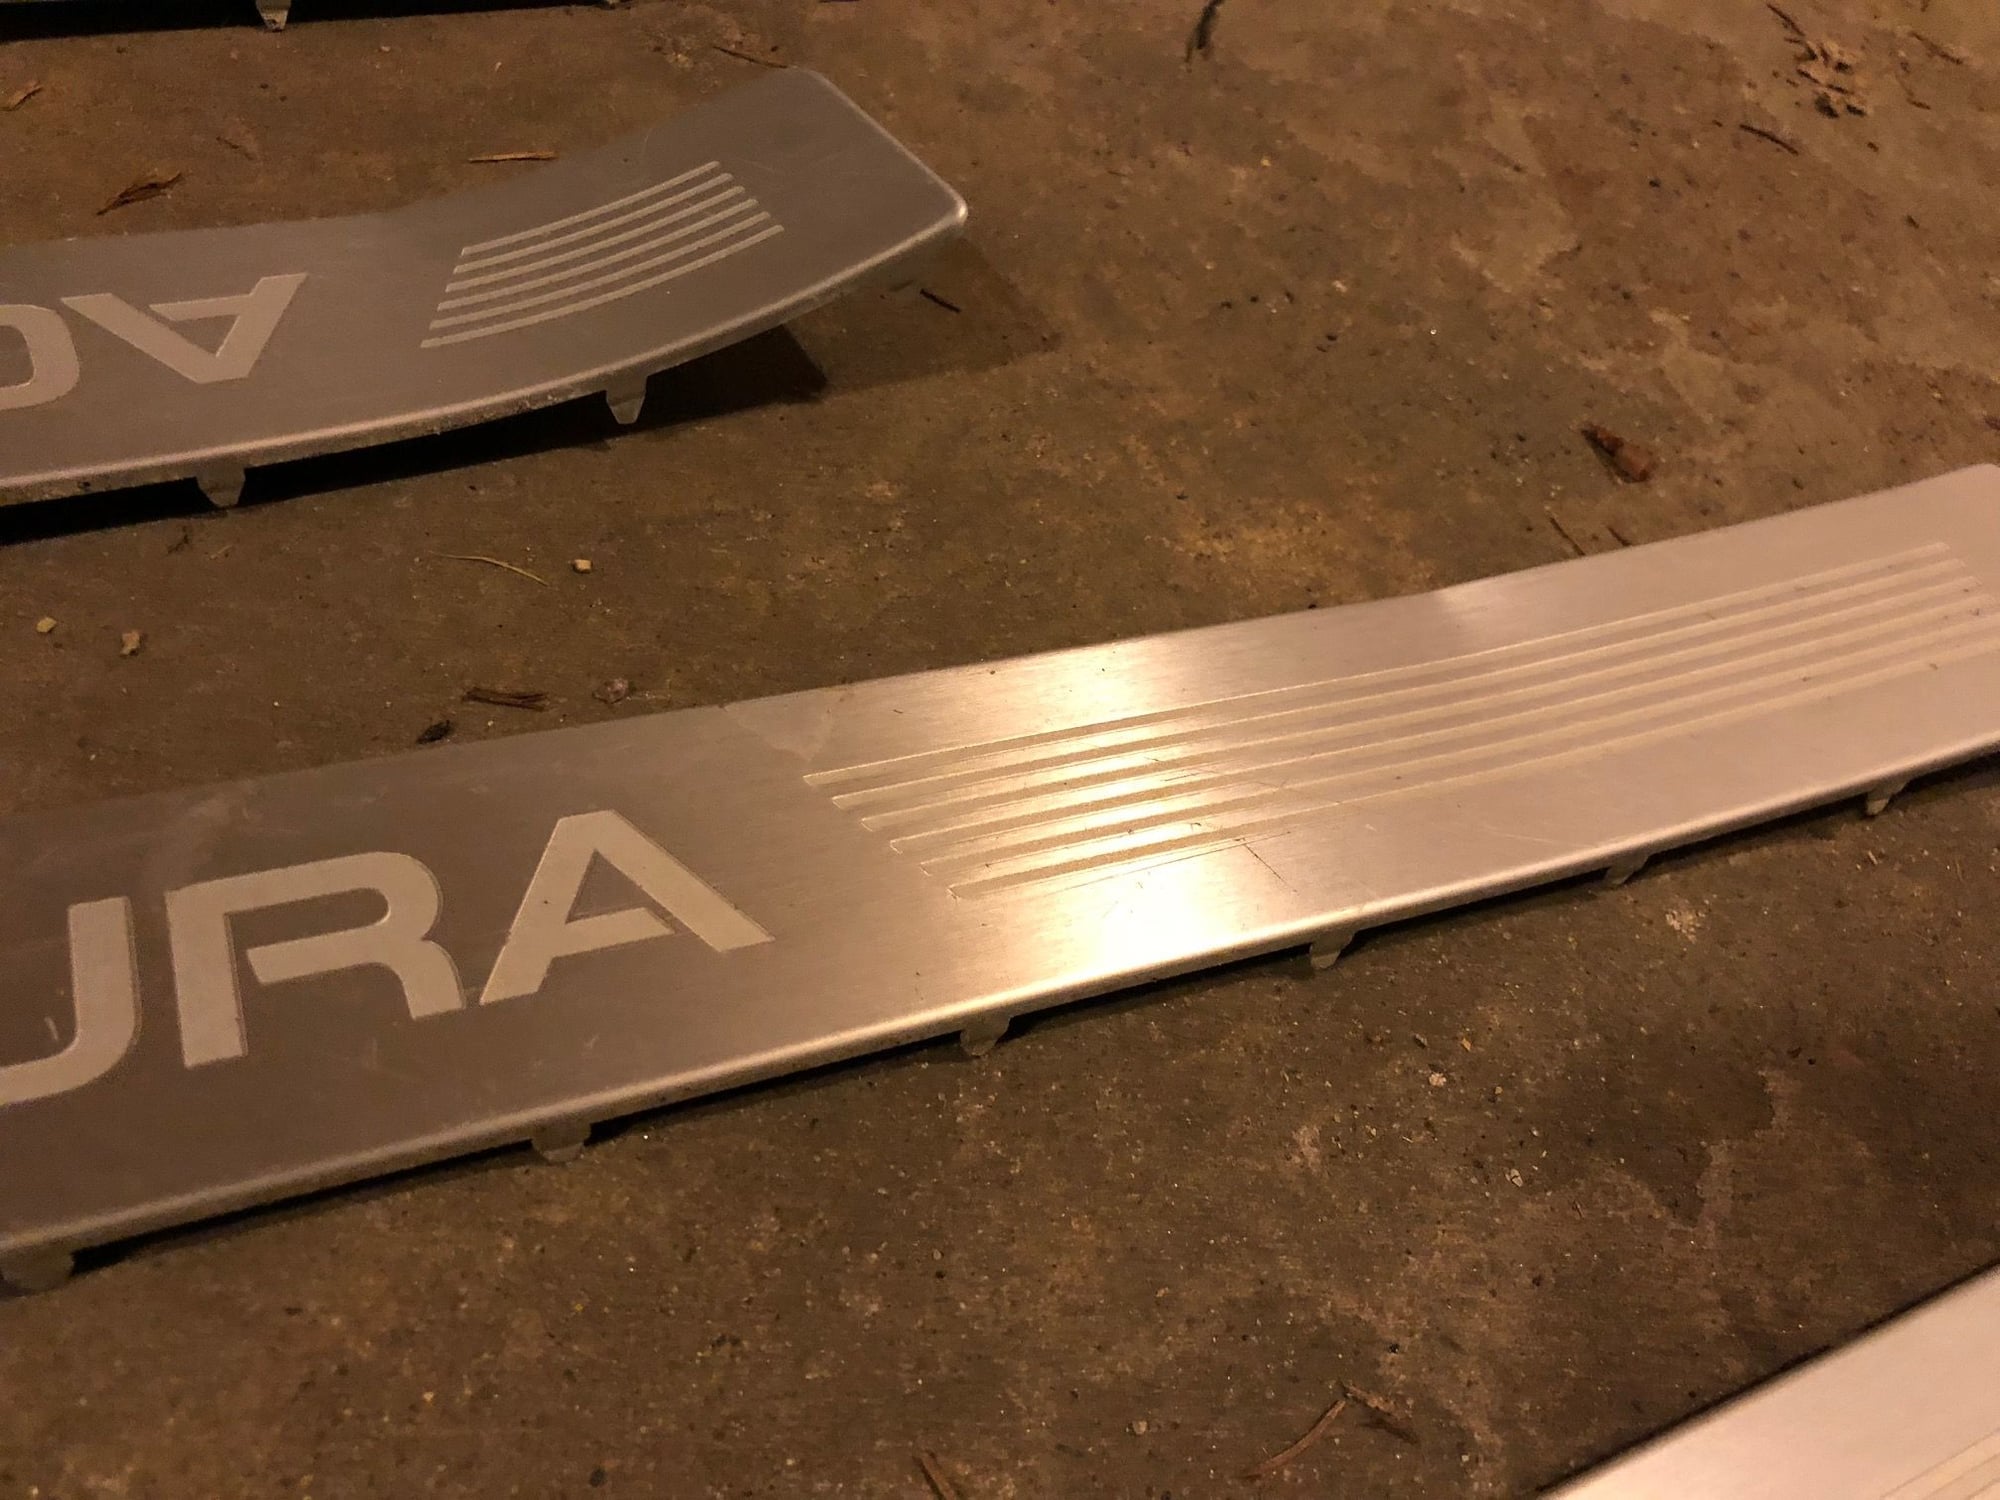 Interior/Upholstery - EXPIRED: FS: 3G Acura TL (2004-2008) Front and Rear Door Sills - Used - 2004 to 2008 Acura TL - Baraboo, WI 53913, United States